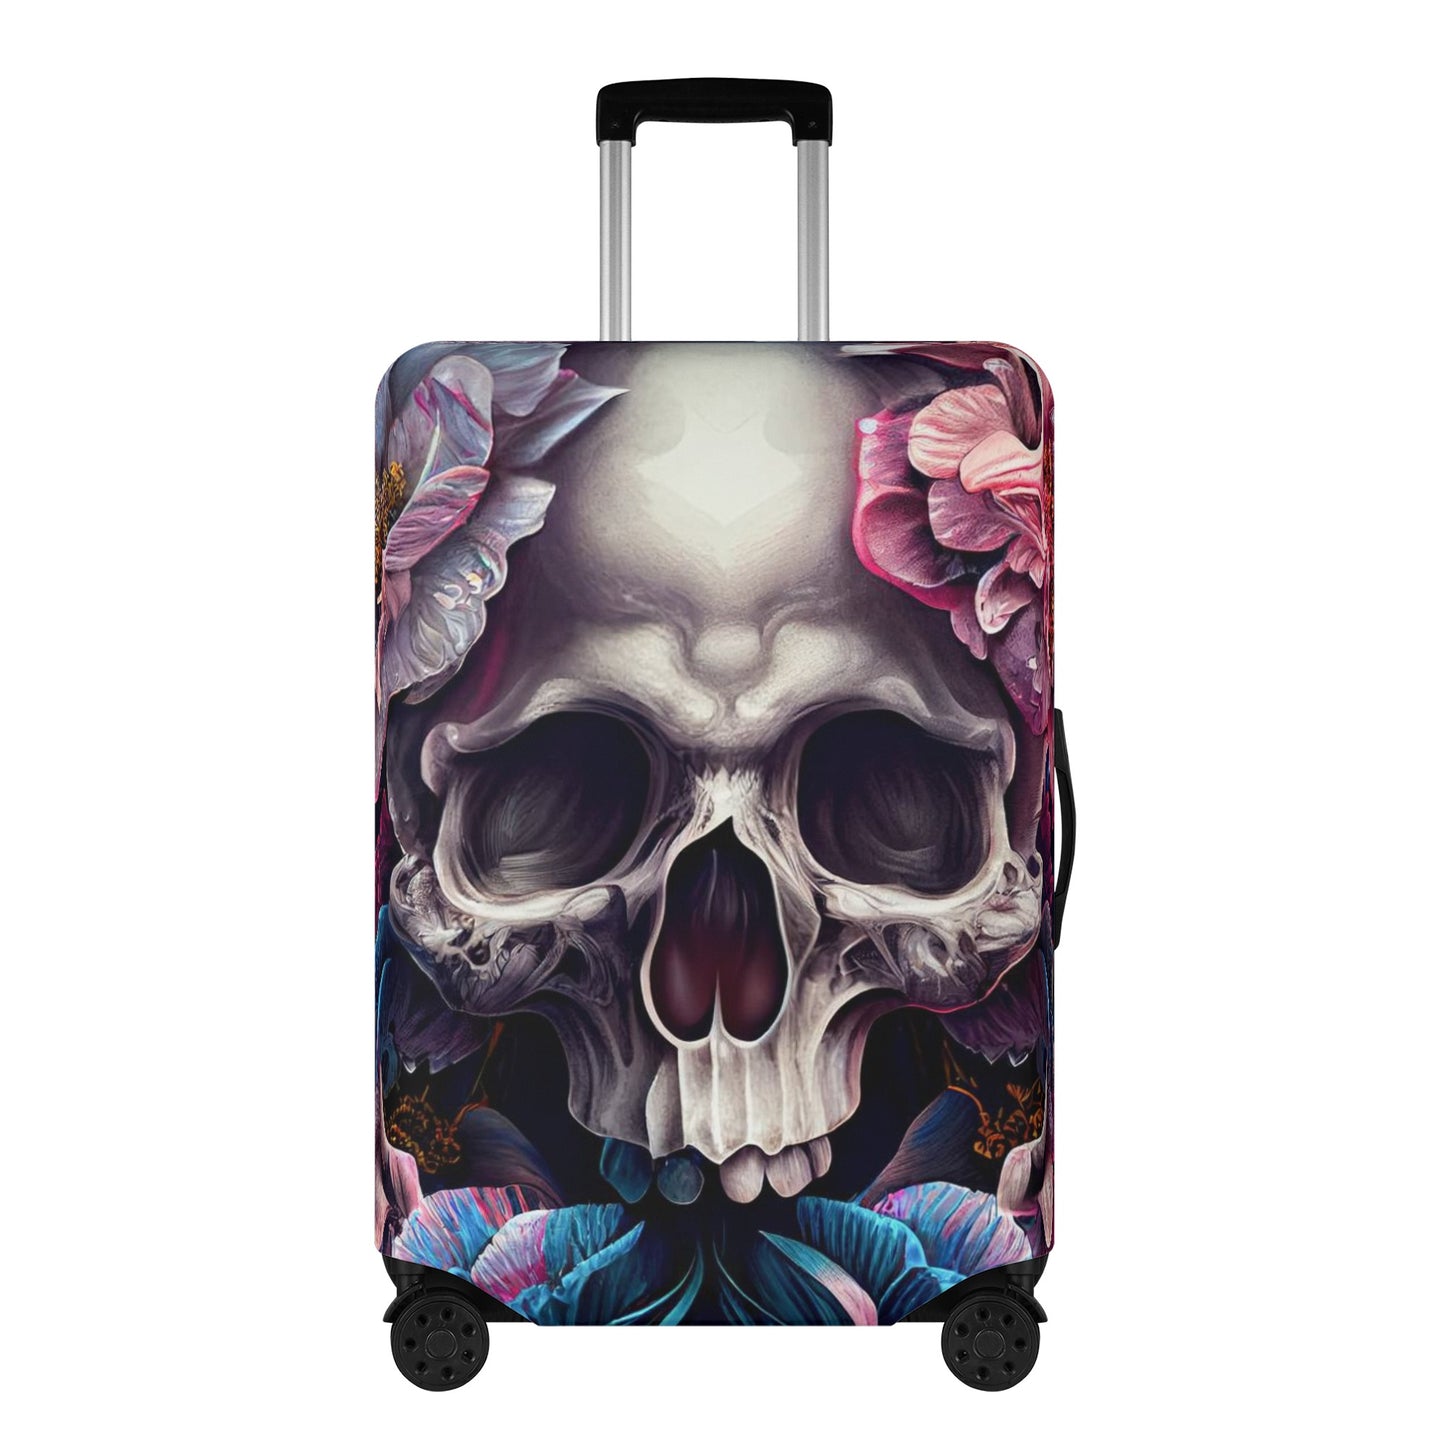 Evil suitcase protector, flaming skull luggage tag, gothic skull suitcase tag, rose skull luggage protector, gothic skull luggage protector, Luggage Cover